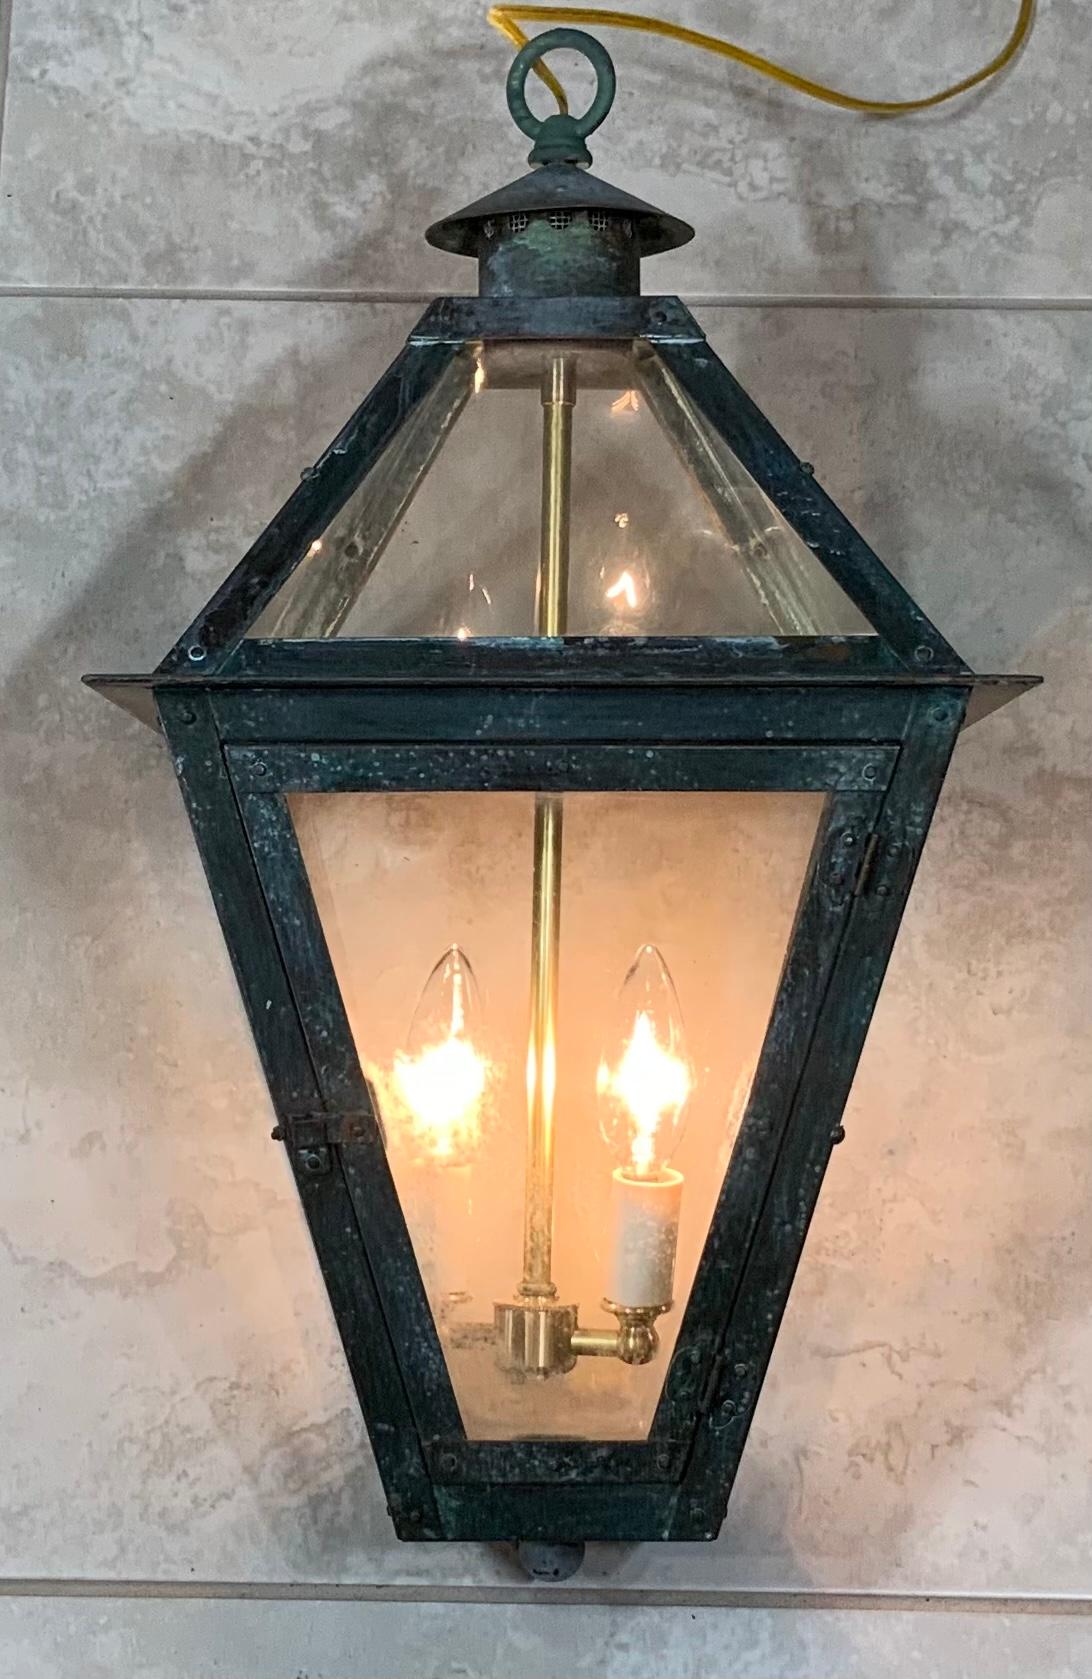 Quality hand forge solid copper lantern with two 60 watt lights.
Electrified and ready to light. Beautiful oxidization patina.
Made in the US, Suitable for wet locations 
Copper canopy included.
   